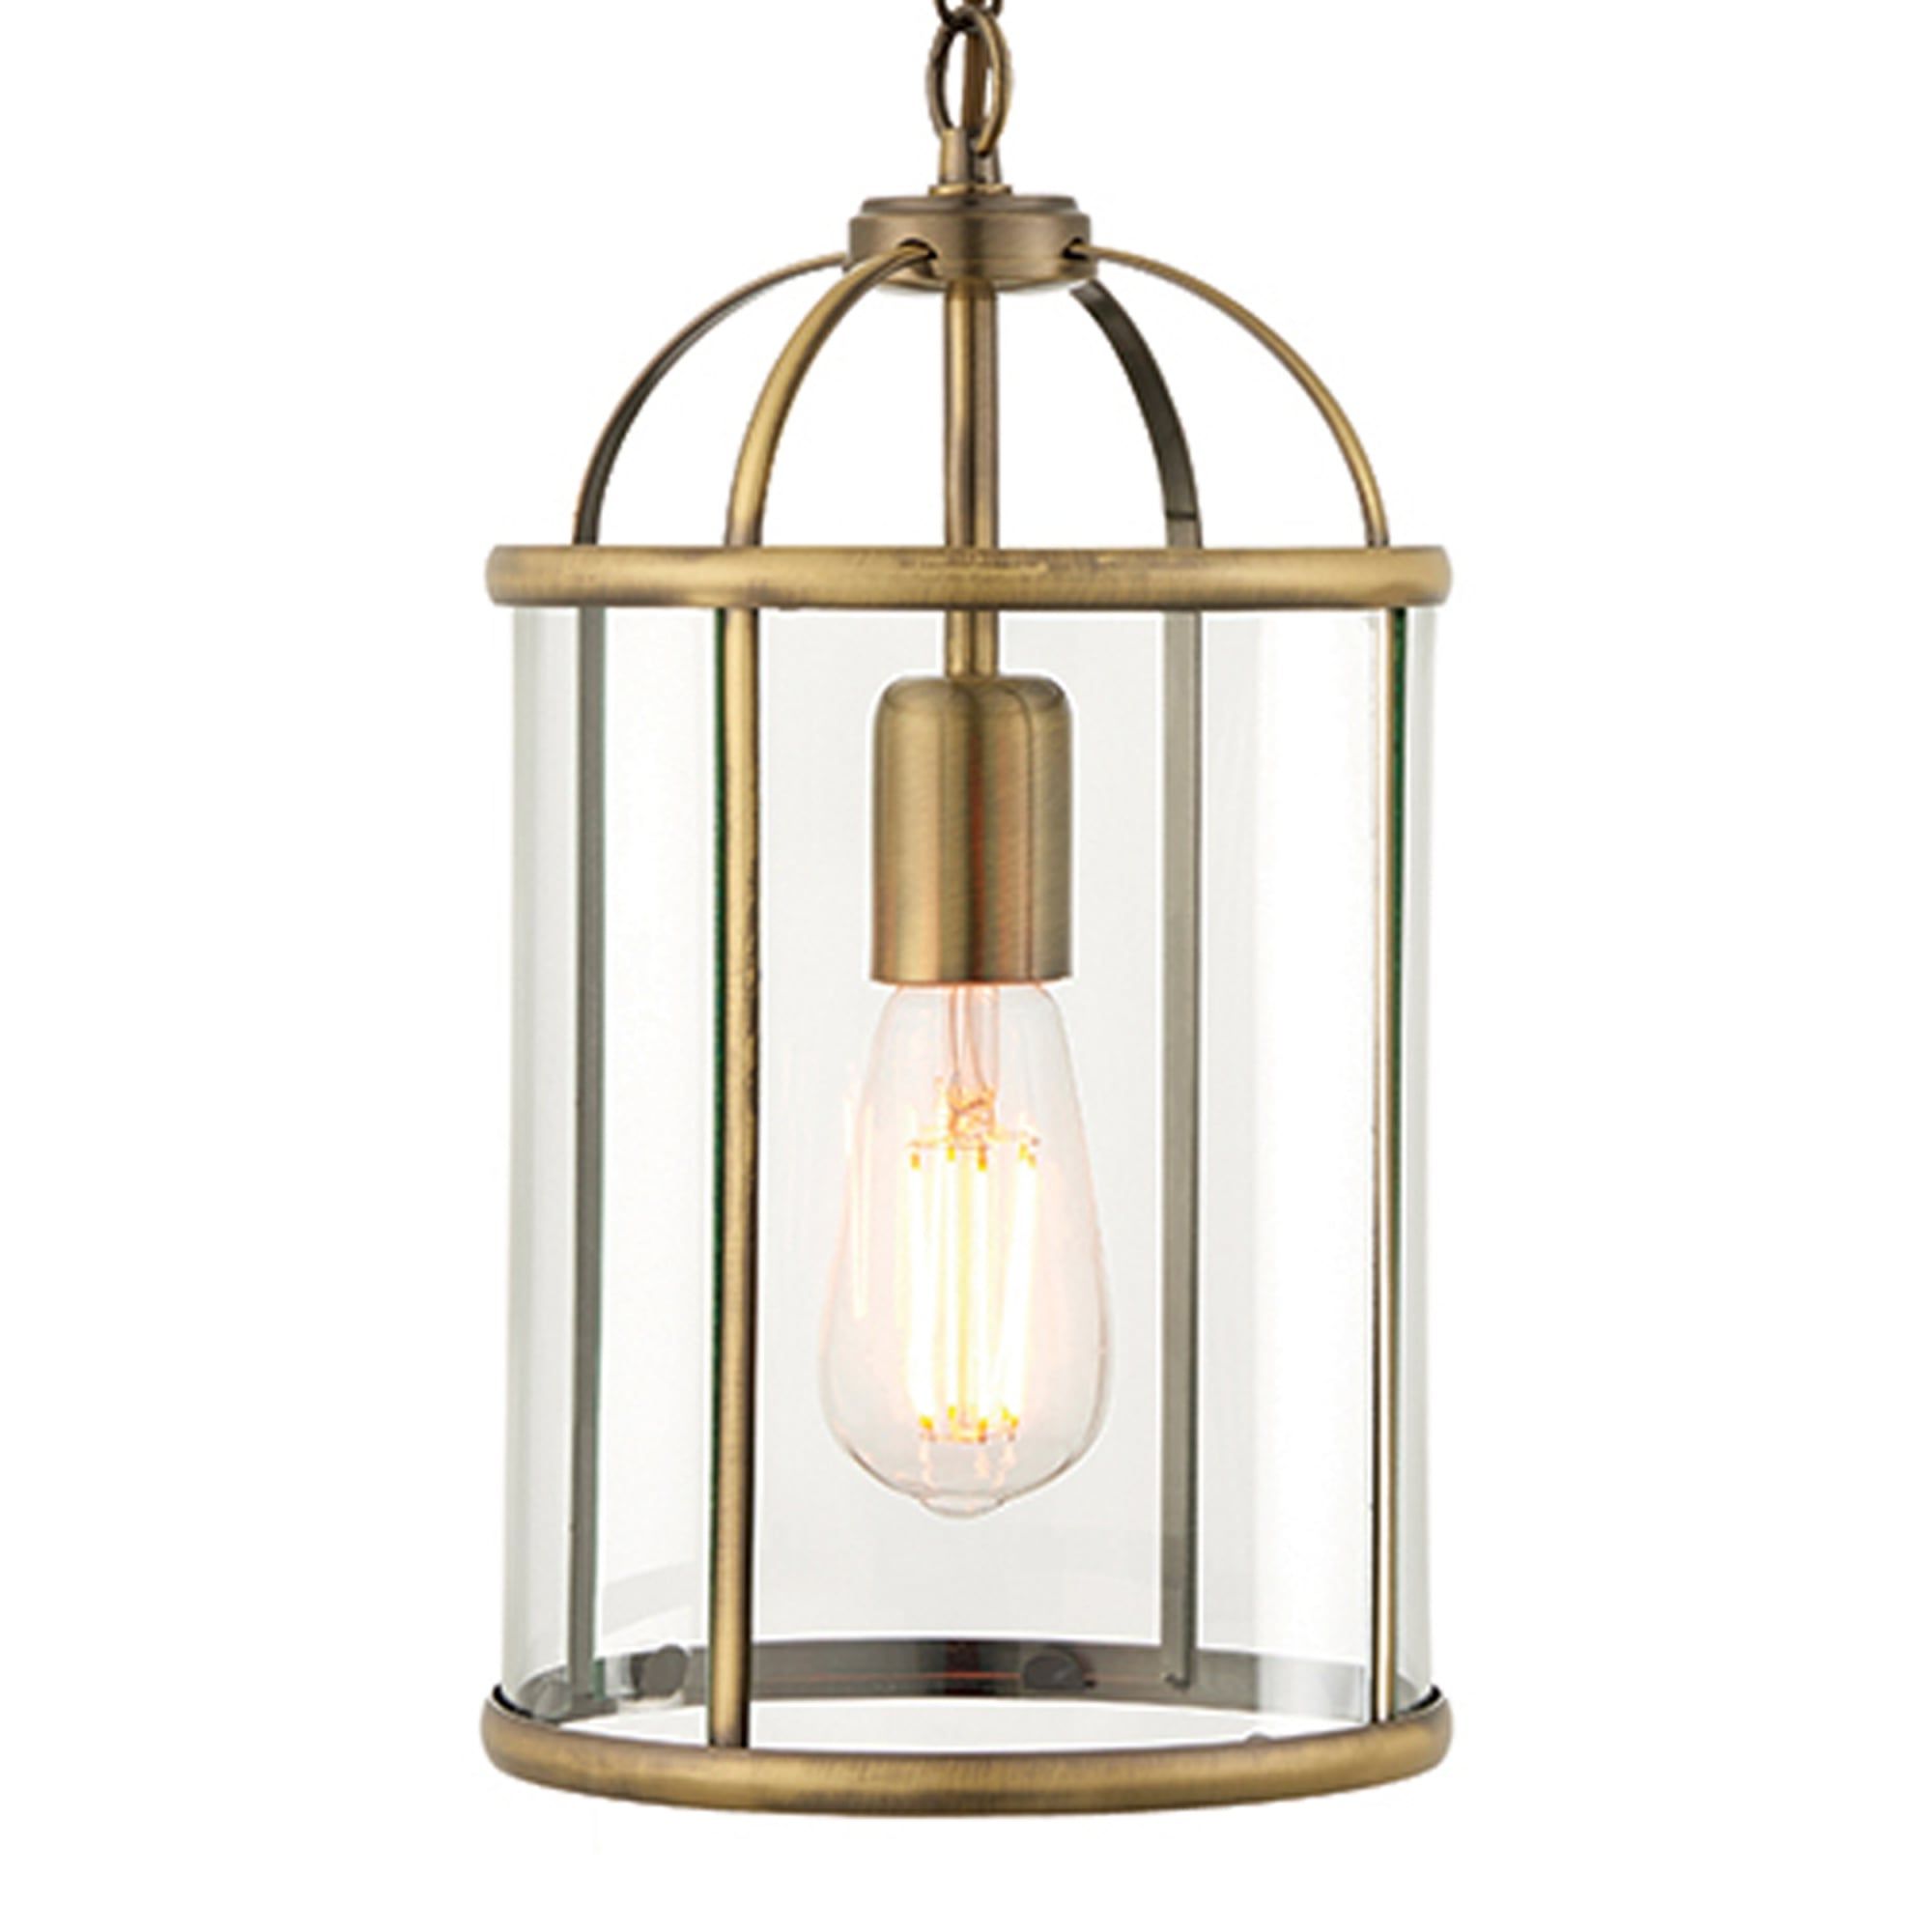 Endon 69454 Lambeth 1 Light Antique Brass And Glass Lantern Pendant Pertaining To 2020 One Light Lantern Chandeliers (View 14 of 15)